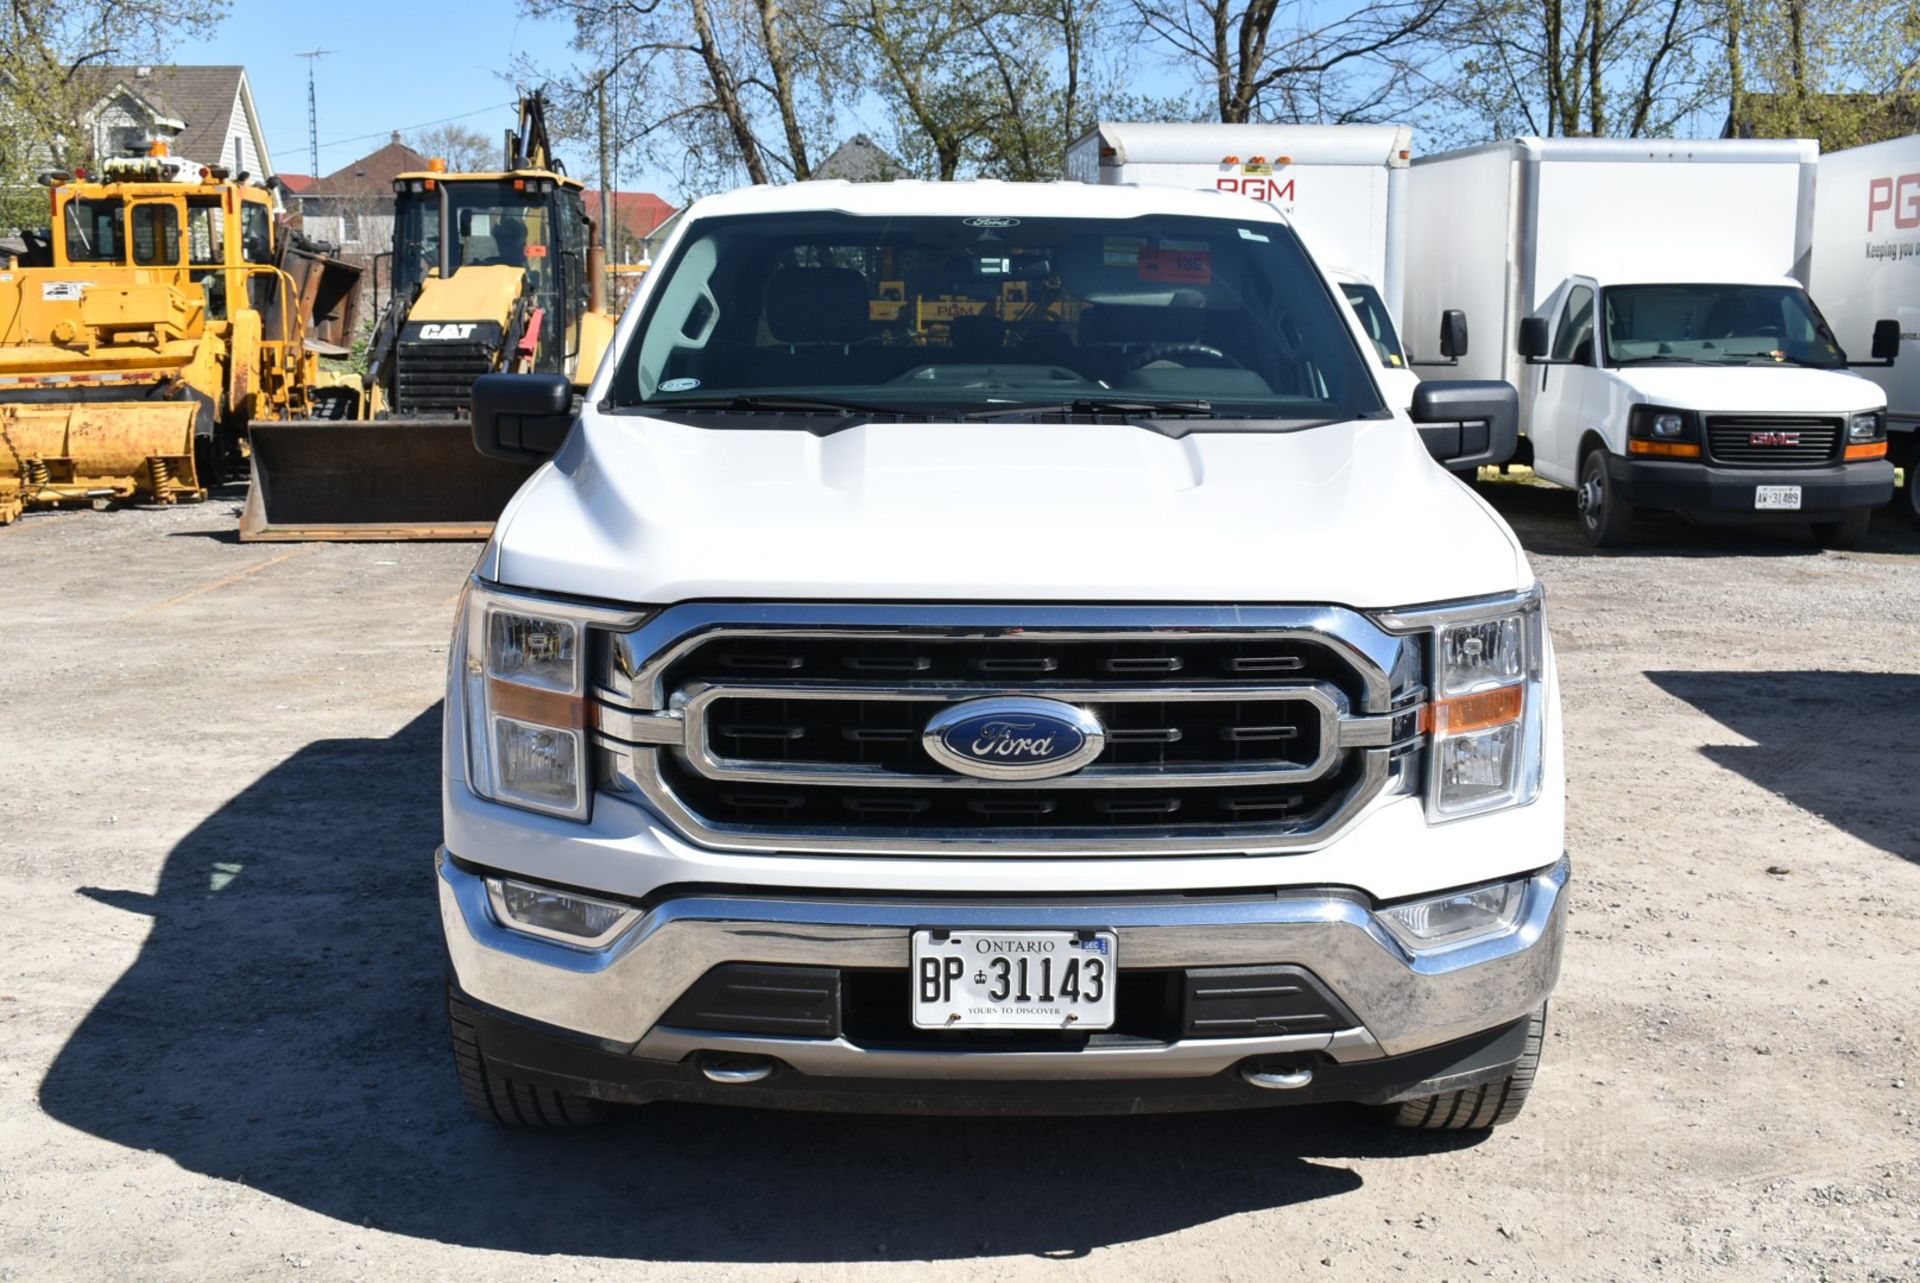 FORD (2021) F150 XLT CREW CAB PICKUP TRUCK WITH GAS ENGINE, AUTO. TRANSMISSION, 4X4, TONNEAU - Image 6 of 15